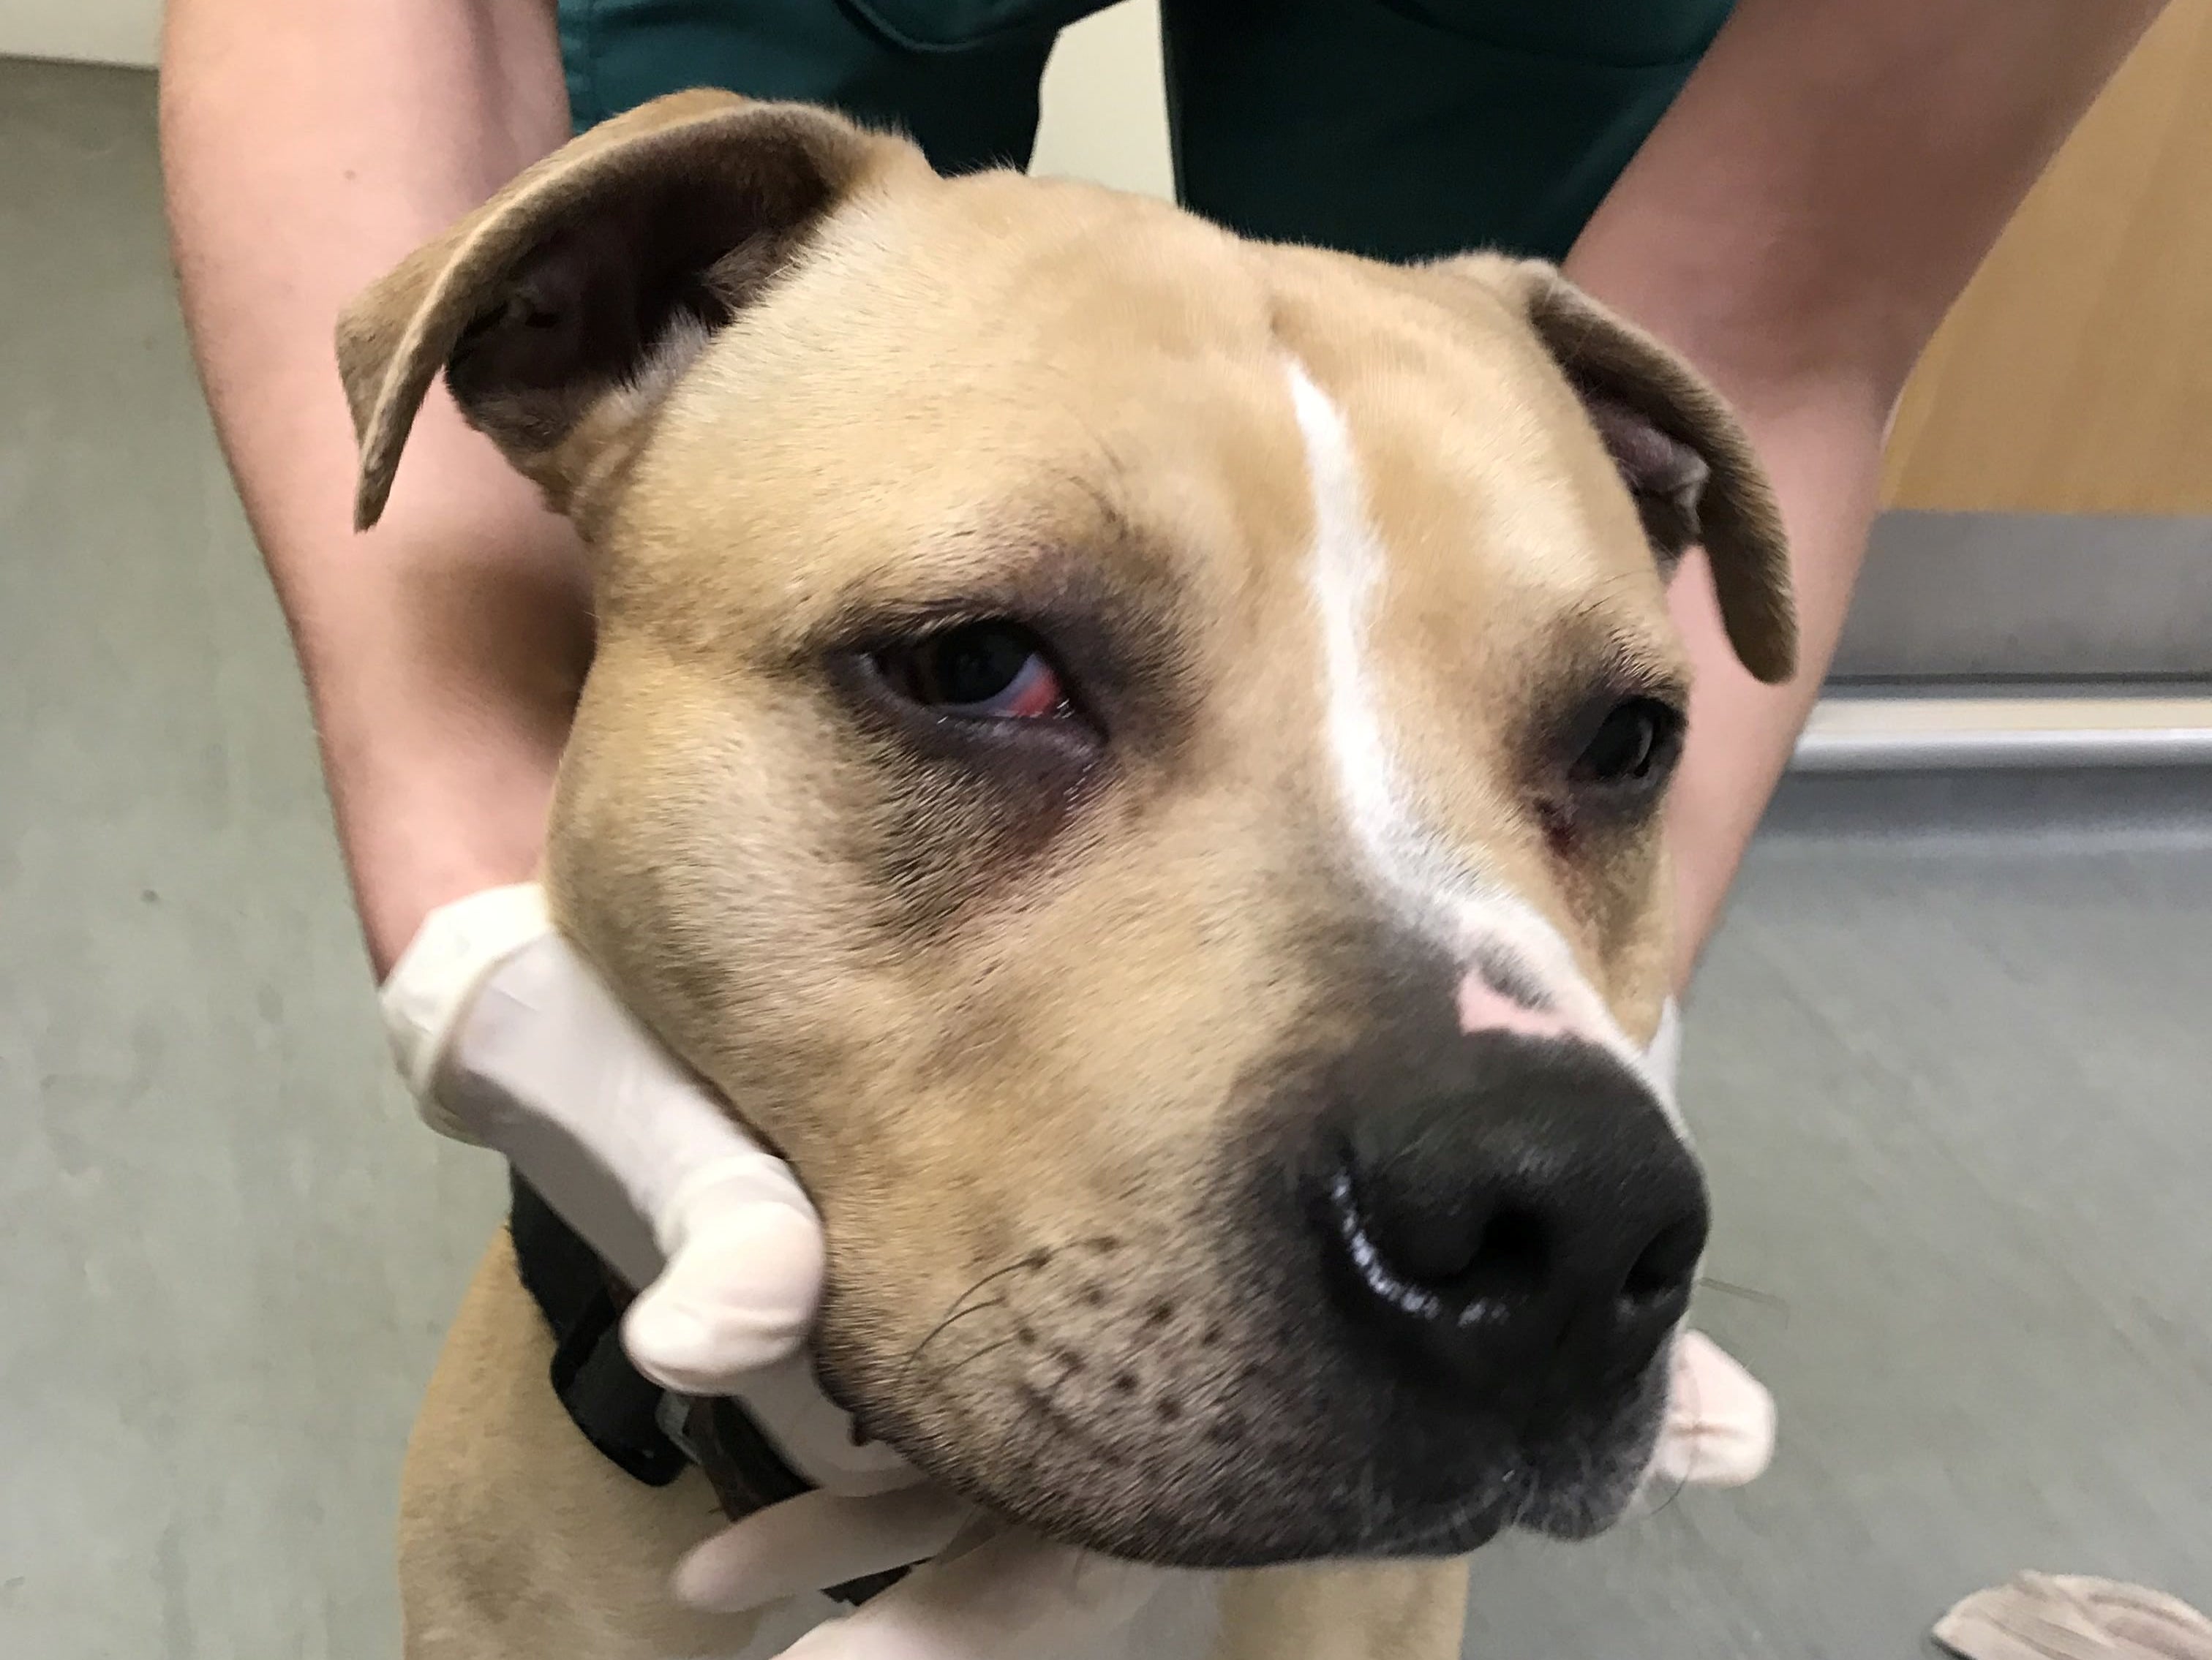 Injuries inflicted on Bobby the dog